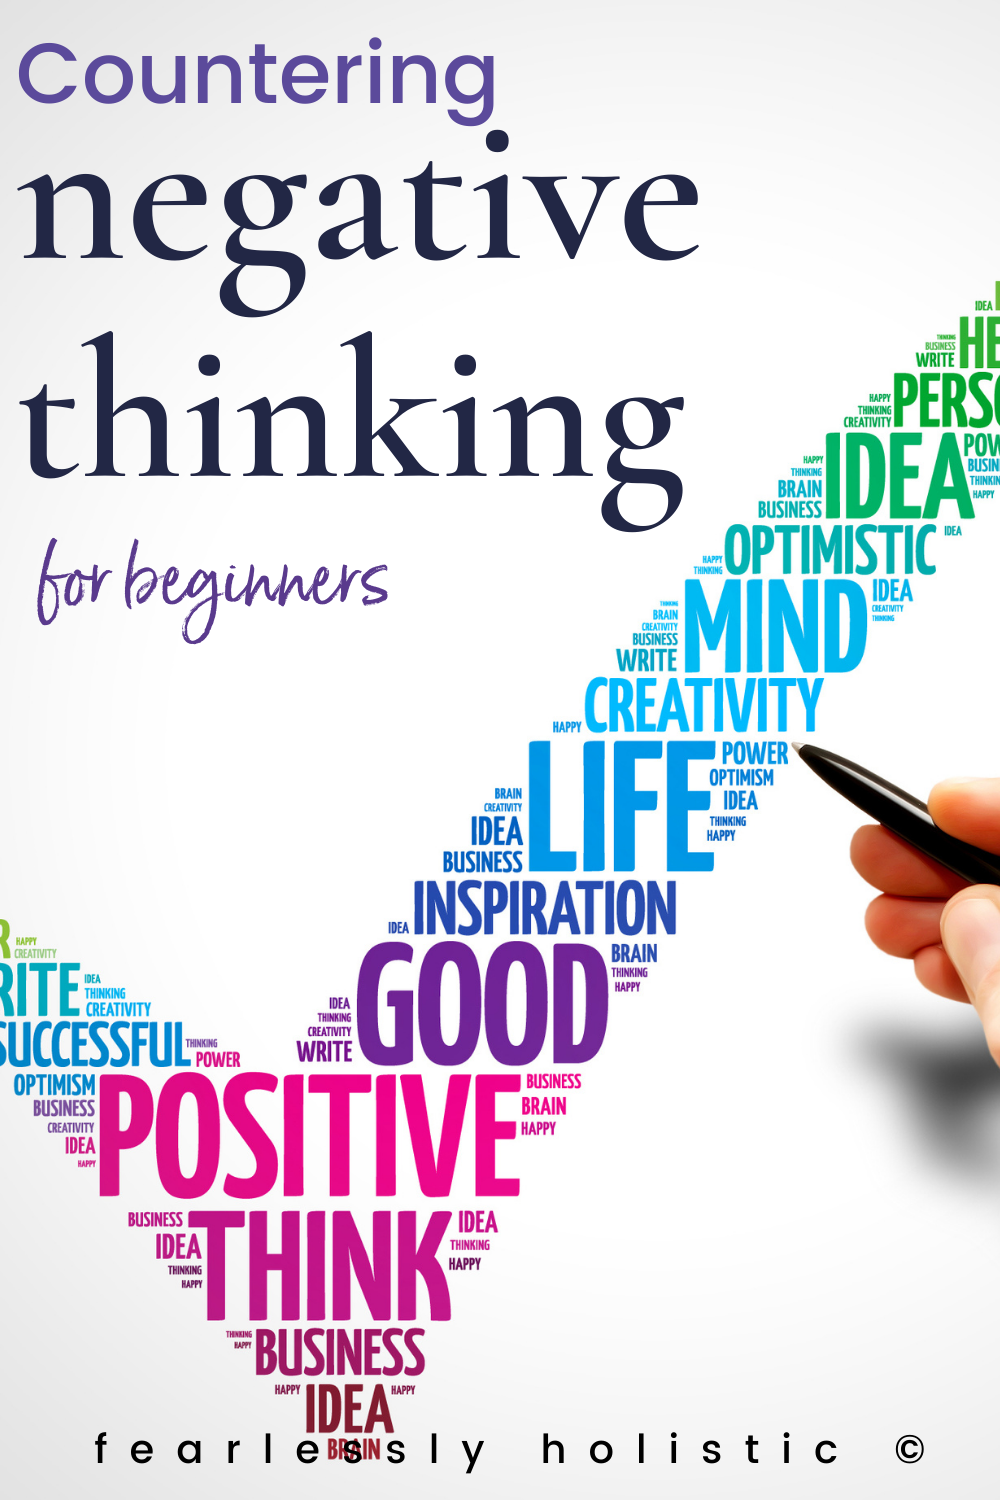 Countering Negative Thoughts